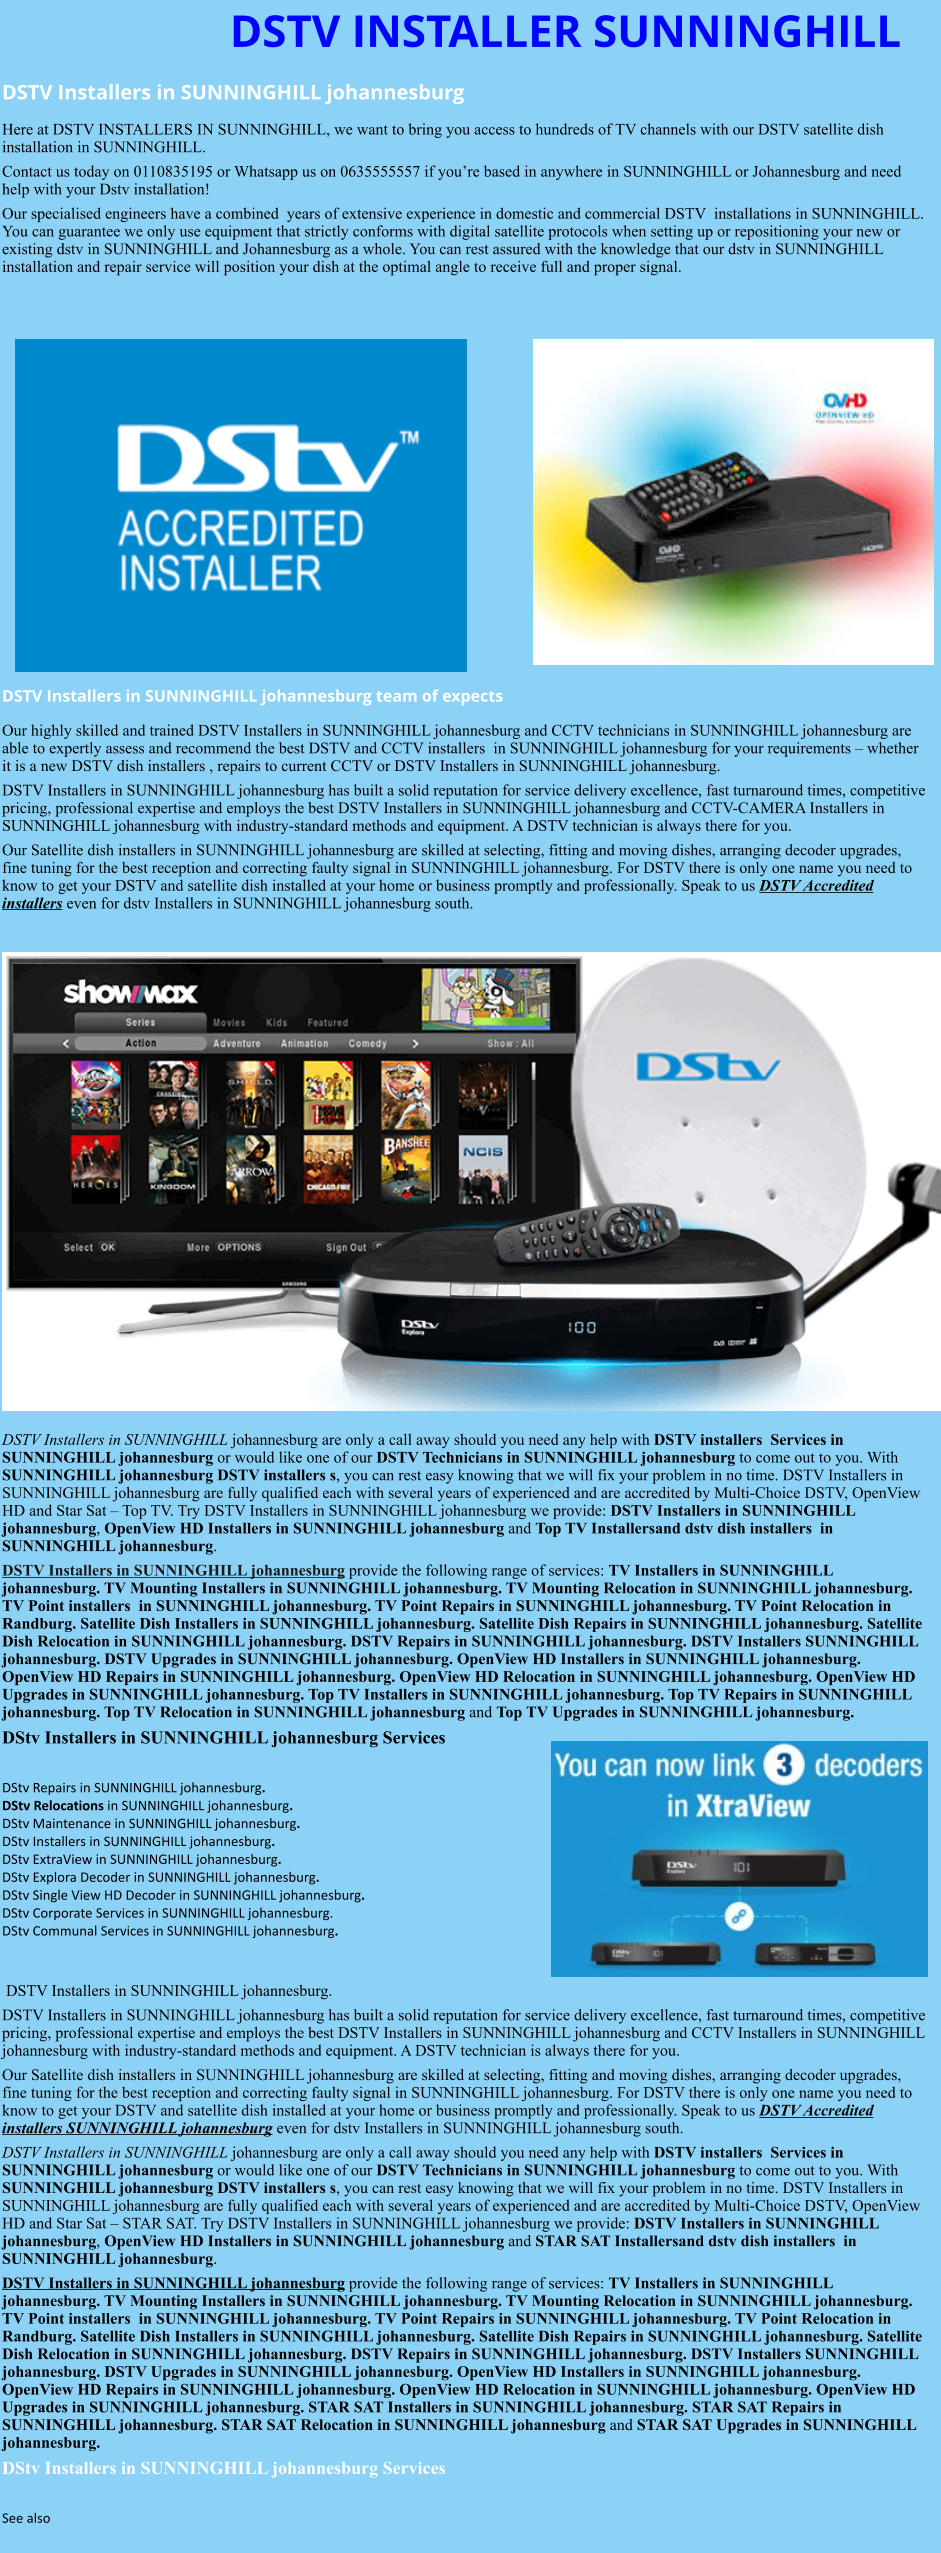 DSTV INSTALLER SUNNINGHILL DSTV Installers in SUNNINGHILL johannesburg  Here at DSTV INSTALLERS IN SUNNINGHILL, we want to bring you access to hundreds of TV channels with our DSTV satellite dish installation in SUNNINGHILL. Contact us today on 0110835195 or Whatsapp us on 0635555557 if you’re based in anywhere in SUNNINGHILL or Johannesburg and need help with your Dstv installation! Our specialised engineers have a combined  years of extensive experience in domestic and commercial DSTV  installations in SUNNINGHILL. You can guarantee we only use equipment that strictly conforms with digital satellite protocols when setting up or repositioning your new or existing dstv in SUNNINGHILL and Johannesburg as a whole. You can rest assured with the knowledge that our dstv in SUNNINGHILL installation and repair service will position your dish at the optimal angle to receive full and proper signal.                 DSTV Installers in SUNNINGHILL johannesburg team of expects Our highly skilled and trained DSTV Installers in SUNNINGHILL johannesburg and CCTV technicians in SUNNINGHILL johannesburg are able to expertly assess and recommend the best DSTV and CCTV installers  in SUNNINGHILL johannesburg for your requirements – whether it is a new DSTV dish installers , repairs to current CCTV or DSTV Installers in SUNNINGHILL johannesburg. DSTV Installers in SUNNINGHILL johannesburg has built a solid reputation for service delivery excellence, fast turnaround times, competitive pricing, professional expertise and employs the best DSTV Installers in SUNNINGHILL johannesburg and CCTV-CAMERA Installers in SUNNINGHILL johannesburg with industry-standard methods and equipment. A DSTV technician is always there for you. Our Satellite dish installers in SUNNINGHILL johannesburg are skilled at selecting, fitting and moving dishes, arranging decoder upgrades, fine tuning for the best reception and correcting faulty signal in SUNNINGHILL johannesburg. For DSTV there is only one name you need to know to get your DSTV and satellite dish installed at your home or business promptly and professionally. Speak to us DSTV Accredited installers even for dstv Installers in SUNNINGHILL johannesburg south.                      DSTV Installers in SUNNINGHILL johannesburg are only a call away should you need any help with DSTV installers  Services in SUNNINGHILL johannesburg or would like one of our DSTV Technicians in SUNNINGHILL johannesburg to come out to you. With SUNNINGHILL johannesburg DSTV installers s, you can rest easy knowing that we will fix your problem in no time. DSTV Installers in SUNNINGHILL johannesburg are fully qualified each with several years of experienced and are accredited by Multi-Choice DSTV, OpenView HD and Star Sat – Top TV. Try DSTV Installers in SUNNINGHILL johannesburg we provide: DSTV Installers in SUNNINGHILL johannesburg, OpenView HD Installers in SUNNINGHILL johannesburg and Top TV Installersand dstv dish installers  in SUNNINGHILL johannesburg. DSTV Installers in SUNNINGHILL johannesburg provide the following range of services: TV Installers in SUNNINGHILL johannesburg. TV Mounting Installers in SUNNINGHILL johannesburg. TV Mounting Relocation in SUNNINGHILL johannesburg. TV Point installers  in SUNNINGHILL johannesburg. TV Point Repairs in SUNNINGHILL johannesburg. TV Point Relocation in Randburg. Satellite Dish Installers in SUNNINGHILL johannesburg. Satellite Dish Repairs in SUNNINGHILL johannesburg. Satellite Dish Relocation in SUNNINGHILL johannesburg. DSTV Repairs in SUNNINGHILL johannesburg. DSTV Installers SUNNINGHILL johannesburg. DSTV Upgrades in SUNNINGHILL johannesburg. OpenView HD Installers in SUNNINGHILL johannesburg. OpenView HD Repairs in SUNNINGHILL johannesburg. OpenView HD Relocation in SUNNINGHILL johannesburg. OpenView HD Upgrades in SUNNINGHILL johannesburg. Top TV Installers in SUNNINGHILL johannesburg. Top TV Repairs in SUNNINGHILL johannesburg. Top TV Relocation in SUNNINGHILL johannesburg and Top TV Upgrades in SUNNINGHILL johannesburg. DStv Installers in SUNNINGHILL johannesburg Services  DStv Repairs in SUNNINGHILL johannesburg.  DStv Relocations in SUNNINGHILL johannesburg.  DStv Maintenance in SUNNINGHILL johannesburg. DStv Installers in SUNNINGHILL johannesburg. DStv ExtraView in SUNNINGHILL johannesburg. DStv Explora Decoder in SUNNINGHILL johannesburg. DStv Single View HD Decoder in SUNNINGHILL johannesburg. DStv Corporate Services in SUNNINGHILL johannesburg. DStv Communal Services in SUNNINGHILL johannesburg.    DSTV Installers in SUNNINGHILL johannesburg. DSTV Installers in SUNNINGHILL johannesburg has built a solid reputation for service delivery excellence, fast turnaround times, competitive pricing, professional expertise and employs the best DSTV Installers in SUNNINGHILL johannesburg and CCTV Installers in SUNNINGHILL johannesburg with industry-standard methods and equipment. A DSTV technician is always there for you. Our Satellite dish installers in SUNNINGHILL johannesburg are skilled at selecting, fitting and moving dishes, arranging decoder upgrades, fine tuning for the best reception and correcting faulty signal in SUNNINGHILL johannesburg. For DSTV there is only one name you need to know to get your DSTV and satellite dish installed at your home or business promptly and professionally. Speak to us DSTV Accredited installers SUNNINGHILL johannesburg even for dstv Installers in SUNNINGHILL johannesburg south. DSTV Installers in SUNNINGHILL johannesburg are only a call away should you need any help with DSTV installers  Services in SUNNINGHILL johannesburg or would like one of our DSTV Technicians in SUNNINGHILL johannesburg to come out to you. With SUNNINGHILL johannesburg DSTV installers s, you can rest easy knowing that we will fix your problem in no time. DSTV Installers in SUNNINGHILL johannesburg are fully qualified each with several years of experienced and are accredited by Multi-Choice DSTV, OpenView HD and Star Sat – STAR SAT. Try DSTV Installers in SUNNINGHILL johannesburg we provide: DSTV Installers in SUNNINGHILL johannesburg, OpenView HD Installers in SUNNINGHILL johannesburg and STAR SAT Installersand dstv dish installers  in SUNNINGHILL johannesburg. DSTV Installers in SUNNINGHILL johannesburg provide the following range of services: TV Installers in SUNNINGHILL johannesburg. TV Mounting Installers in SUNNINGHILL johannesburg. TV Mounting Relocation in SUNNINGHILL johannesburg. TV Point installers  in SUNNINGHILL johannesburg. TV Point Repairs in SUNNINGHILL johannesburg. TV Point Relocation in Randburg. Satellite Dish Installers in SUNNINGHILL johannesburg. Satellite Dish Repairs in SUNNINGHILL johannesburg. Satellite Dish Relocation in SUNNINGHILL johannesburg. DSTV Repairs in SUNNINGHILL johannesburg. DSTV Installers SUNNINGHILL johannesburg. DSTV Upgrades in SUNNINGHILL johannesburg. OpenView HD Installers in SUNNINGHILL johannesburg. OpenView HD Repairs in SUNNINGHILL johannesburg. OpenView HD Relocation in SUNNINGHILL johannesburg. OpenView HD Upgrades in SUNNINGHILL johannesburg. STAR SAT Installers in SUNNINGHILL johannesburg. STAR SAT Repairs in SUNNINGHILL johannesburg. STAR SAT Relocation in SUNNINGHILL johannesburg and STAR SAT Upgrades in SUNNINGHILL johannesburg. DStv Installers in SUNNINGHILL johannesburg Services  See also